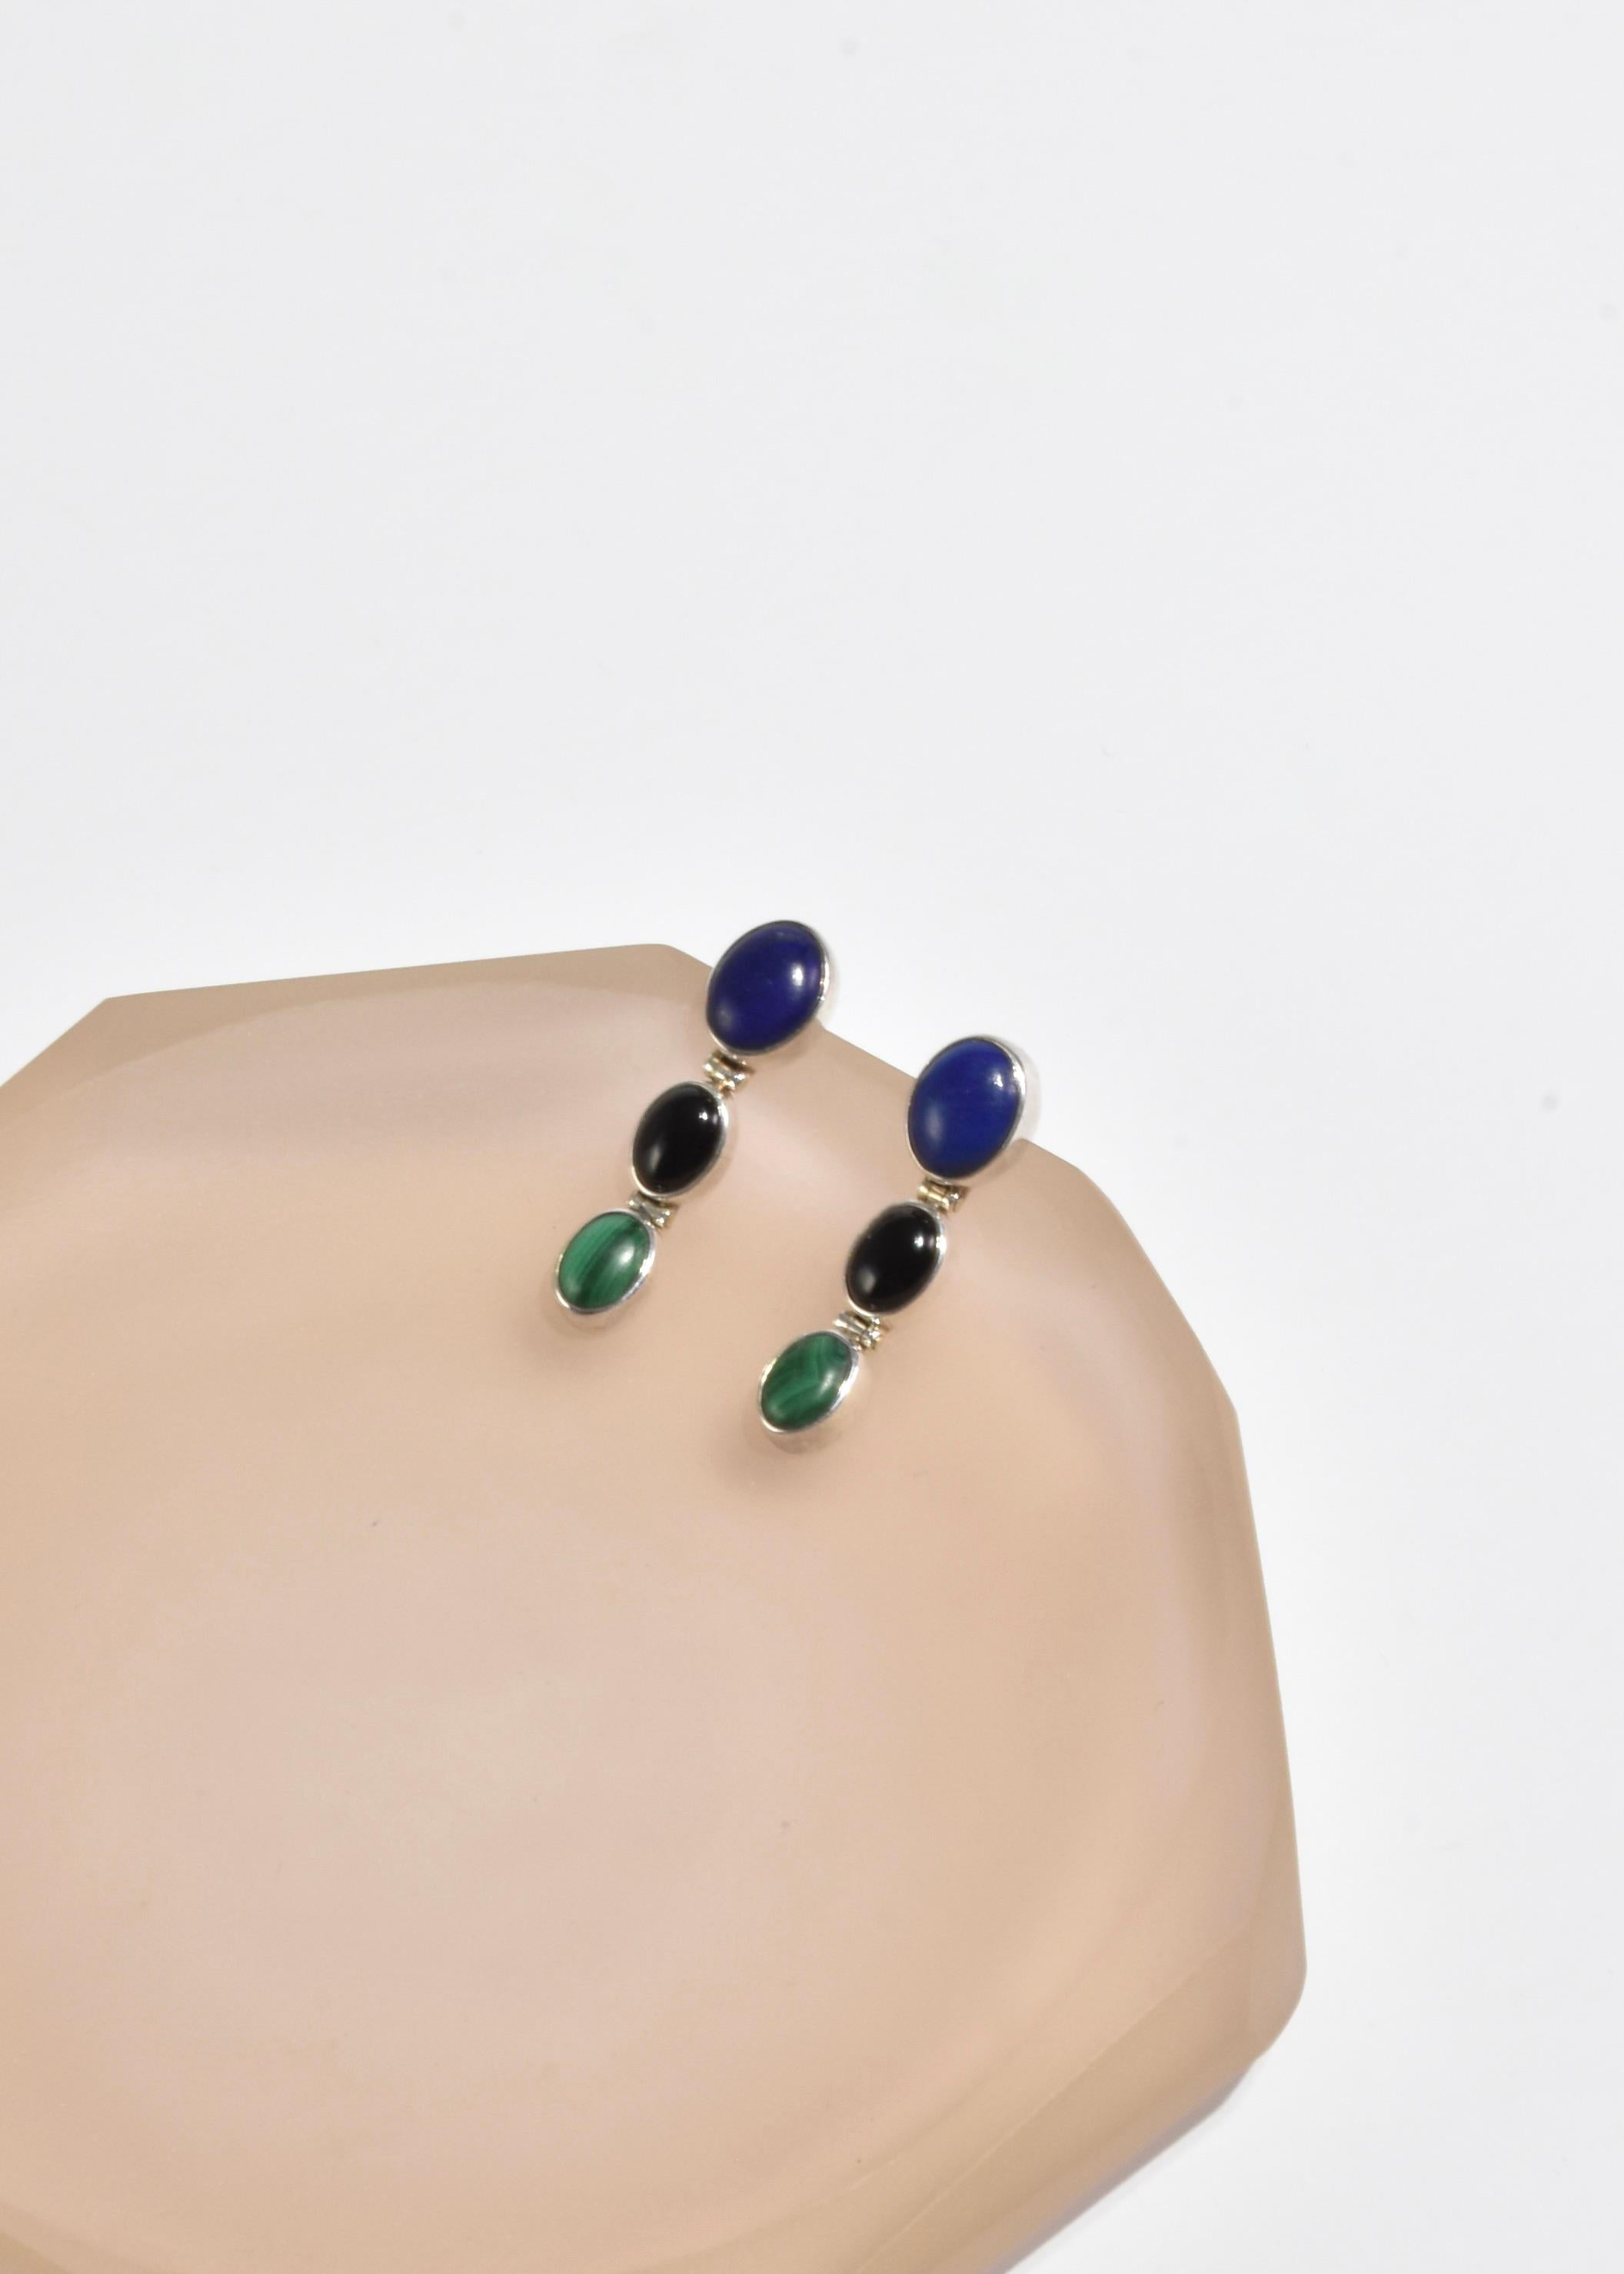 Beautiful vintage silver earrings with cascading oval lapis, onyx, and malachite stones. Pierced, stamped 925.

Material: Sterling silver, onyx, malachite, lapis lazuli.